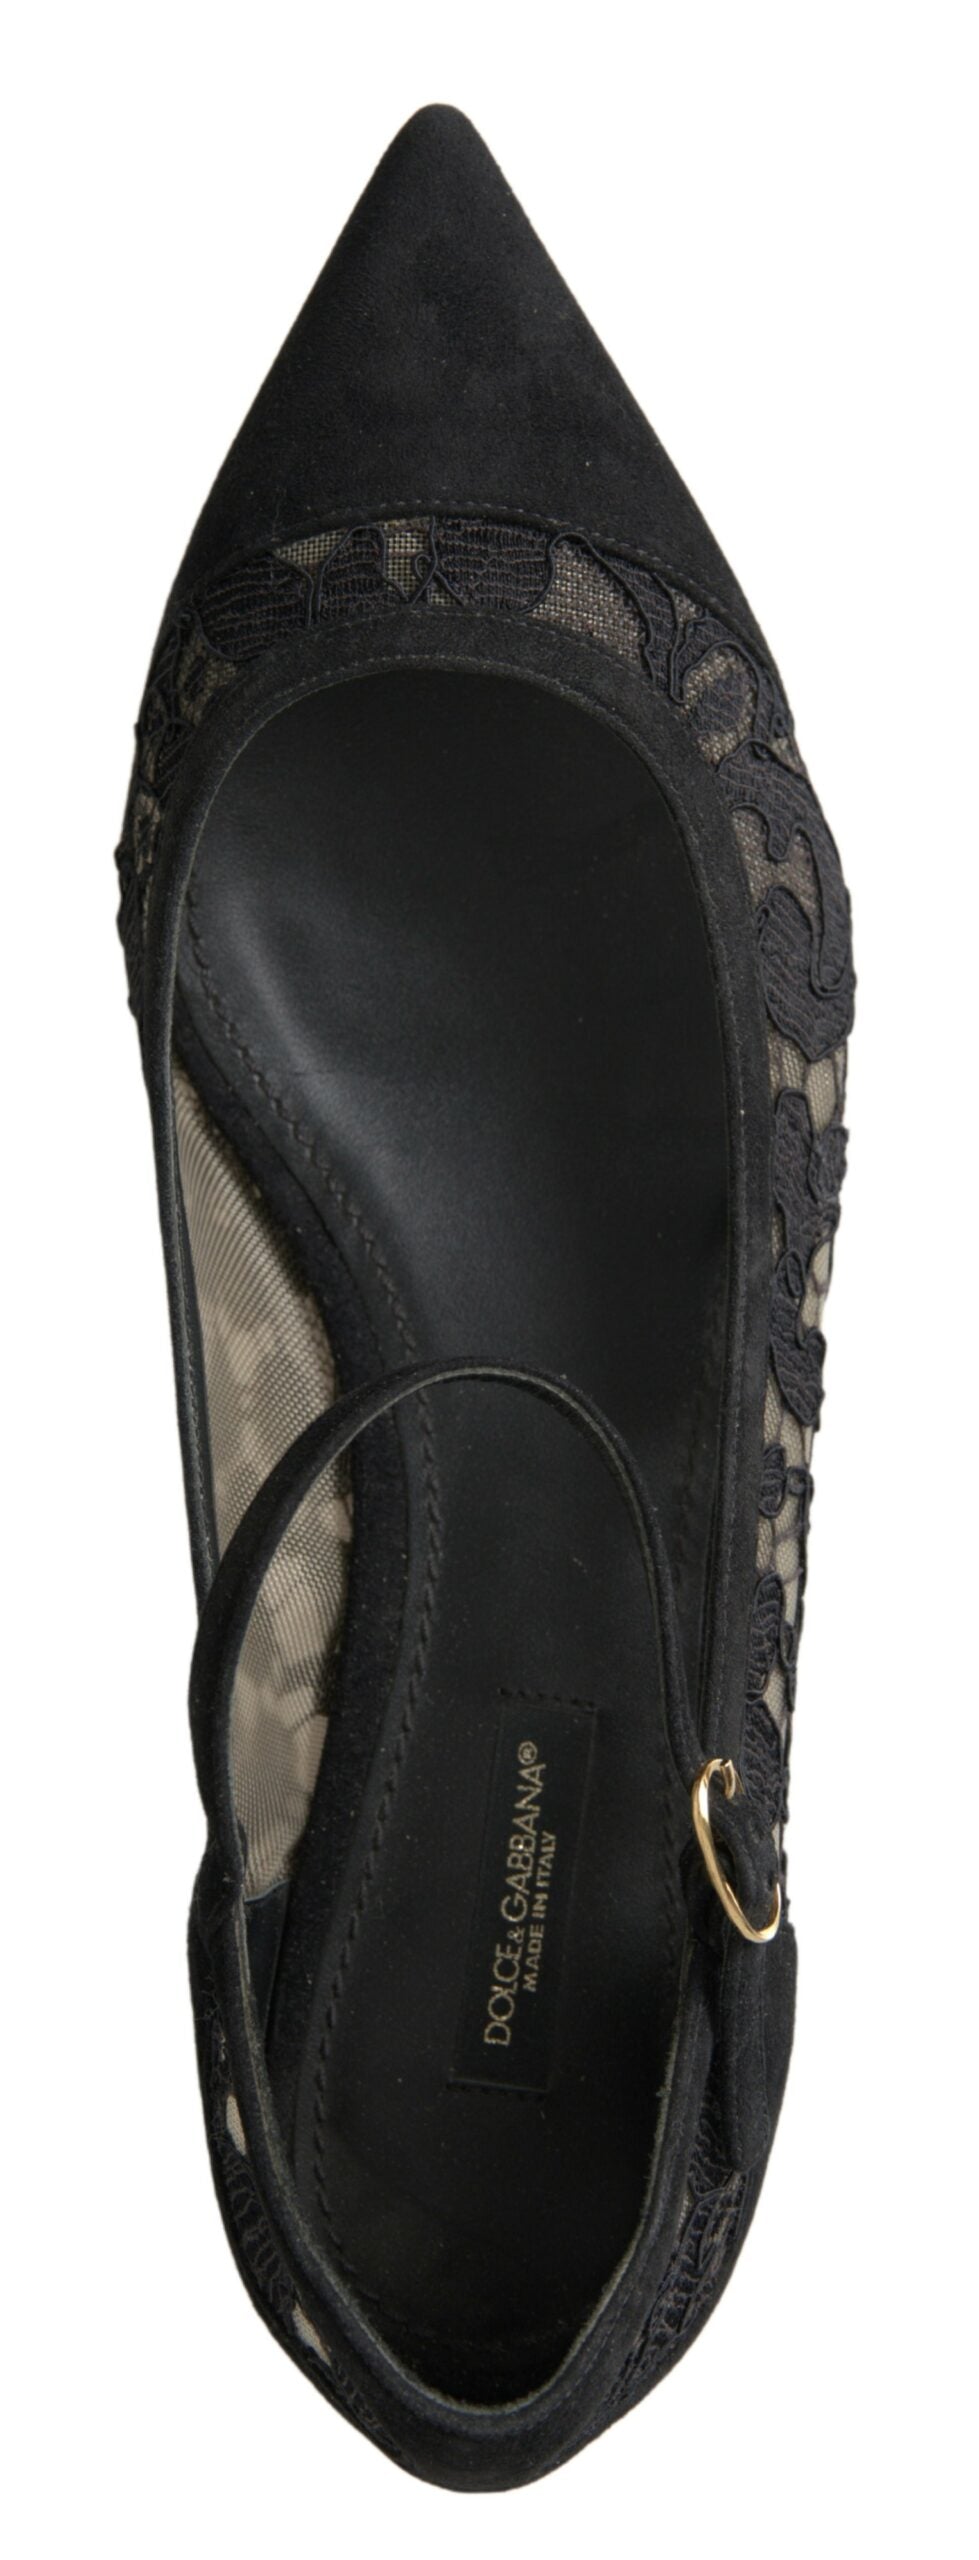 Dolce & Gabbana Black Lace Loafers Ballerina Flats Shoes